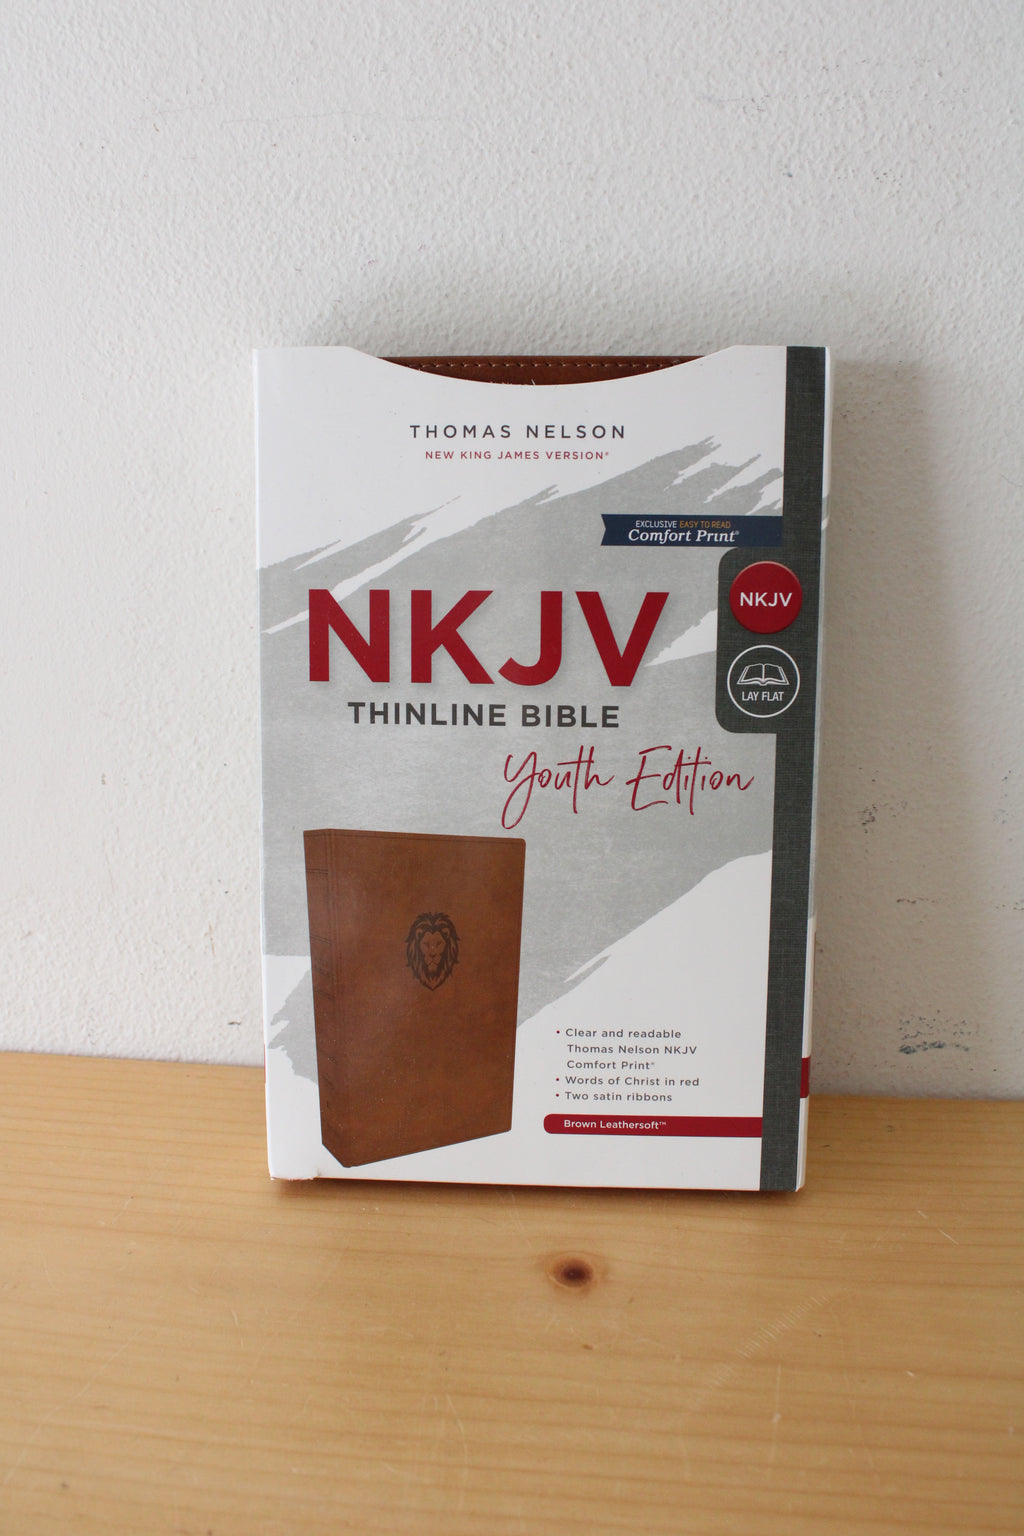 NKJV Thinline Bible Youth Edition By Thomas Nelson